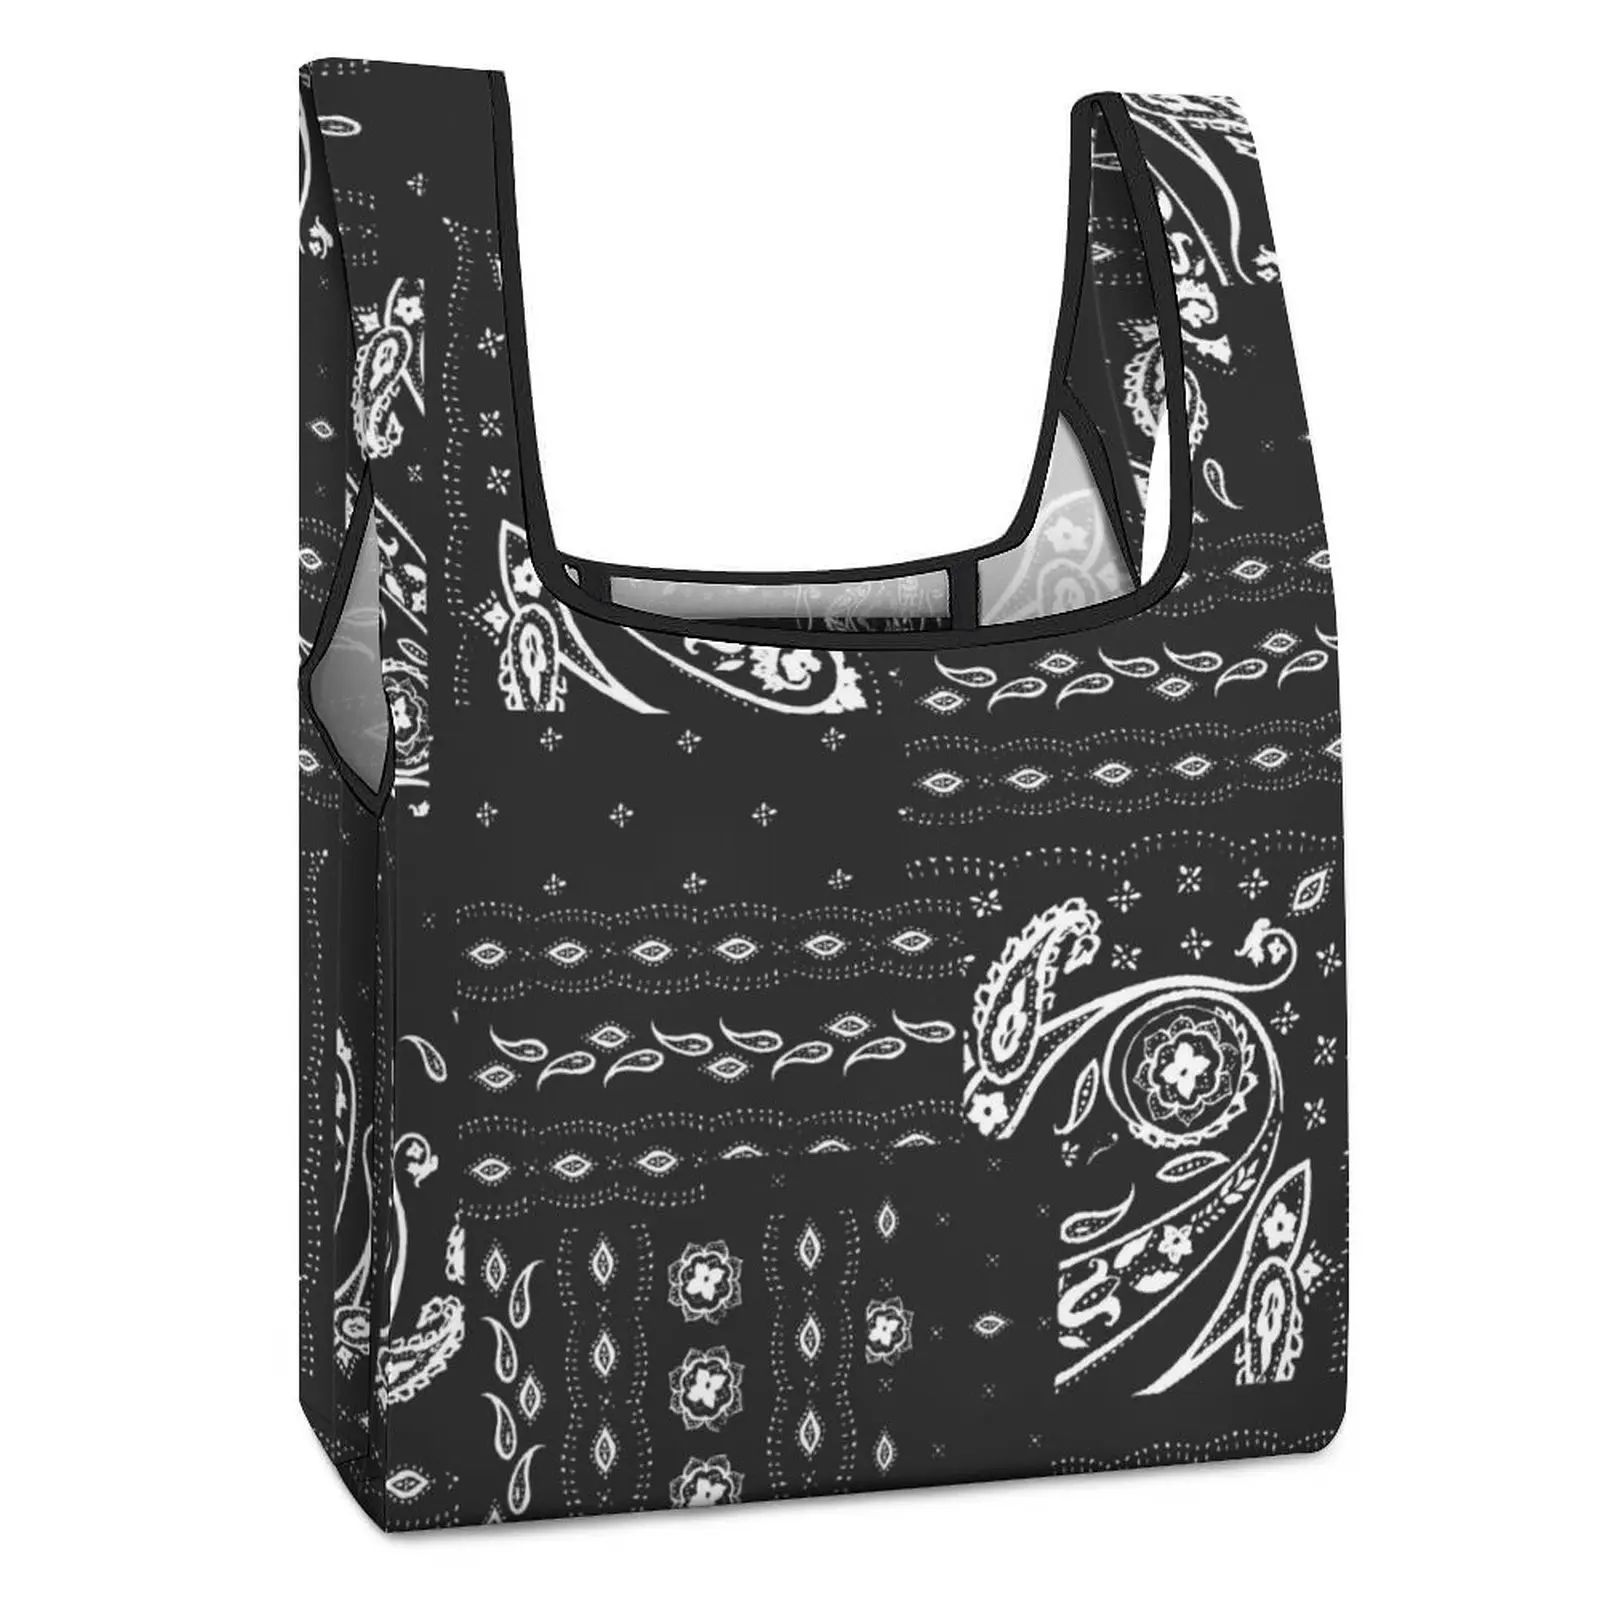 Customized Printed Shopping Bag Double Strap Handbag Black Unique Decor Tote Casual Woman Grocery Bag Custom Pattern black retro print shopping bags waterproof foldable tote bags for women casual woman grocery customizable pattern